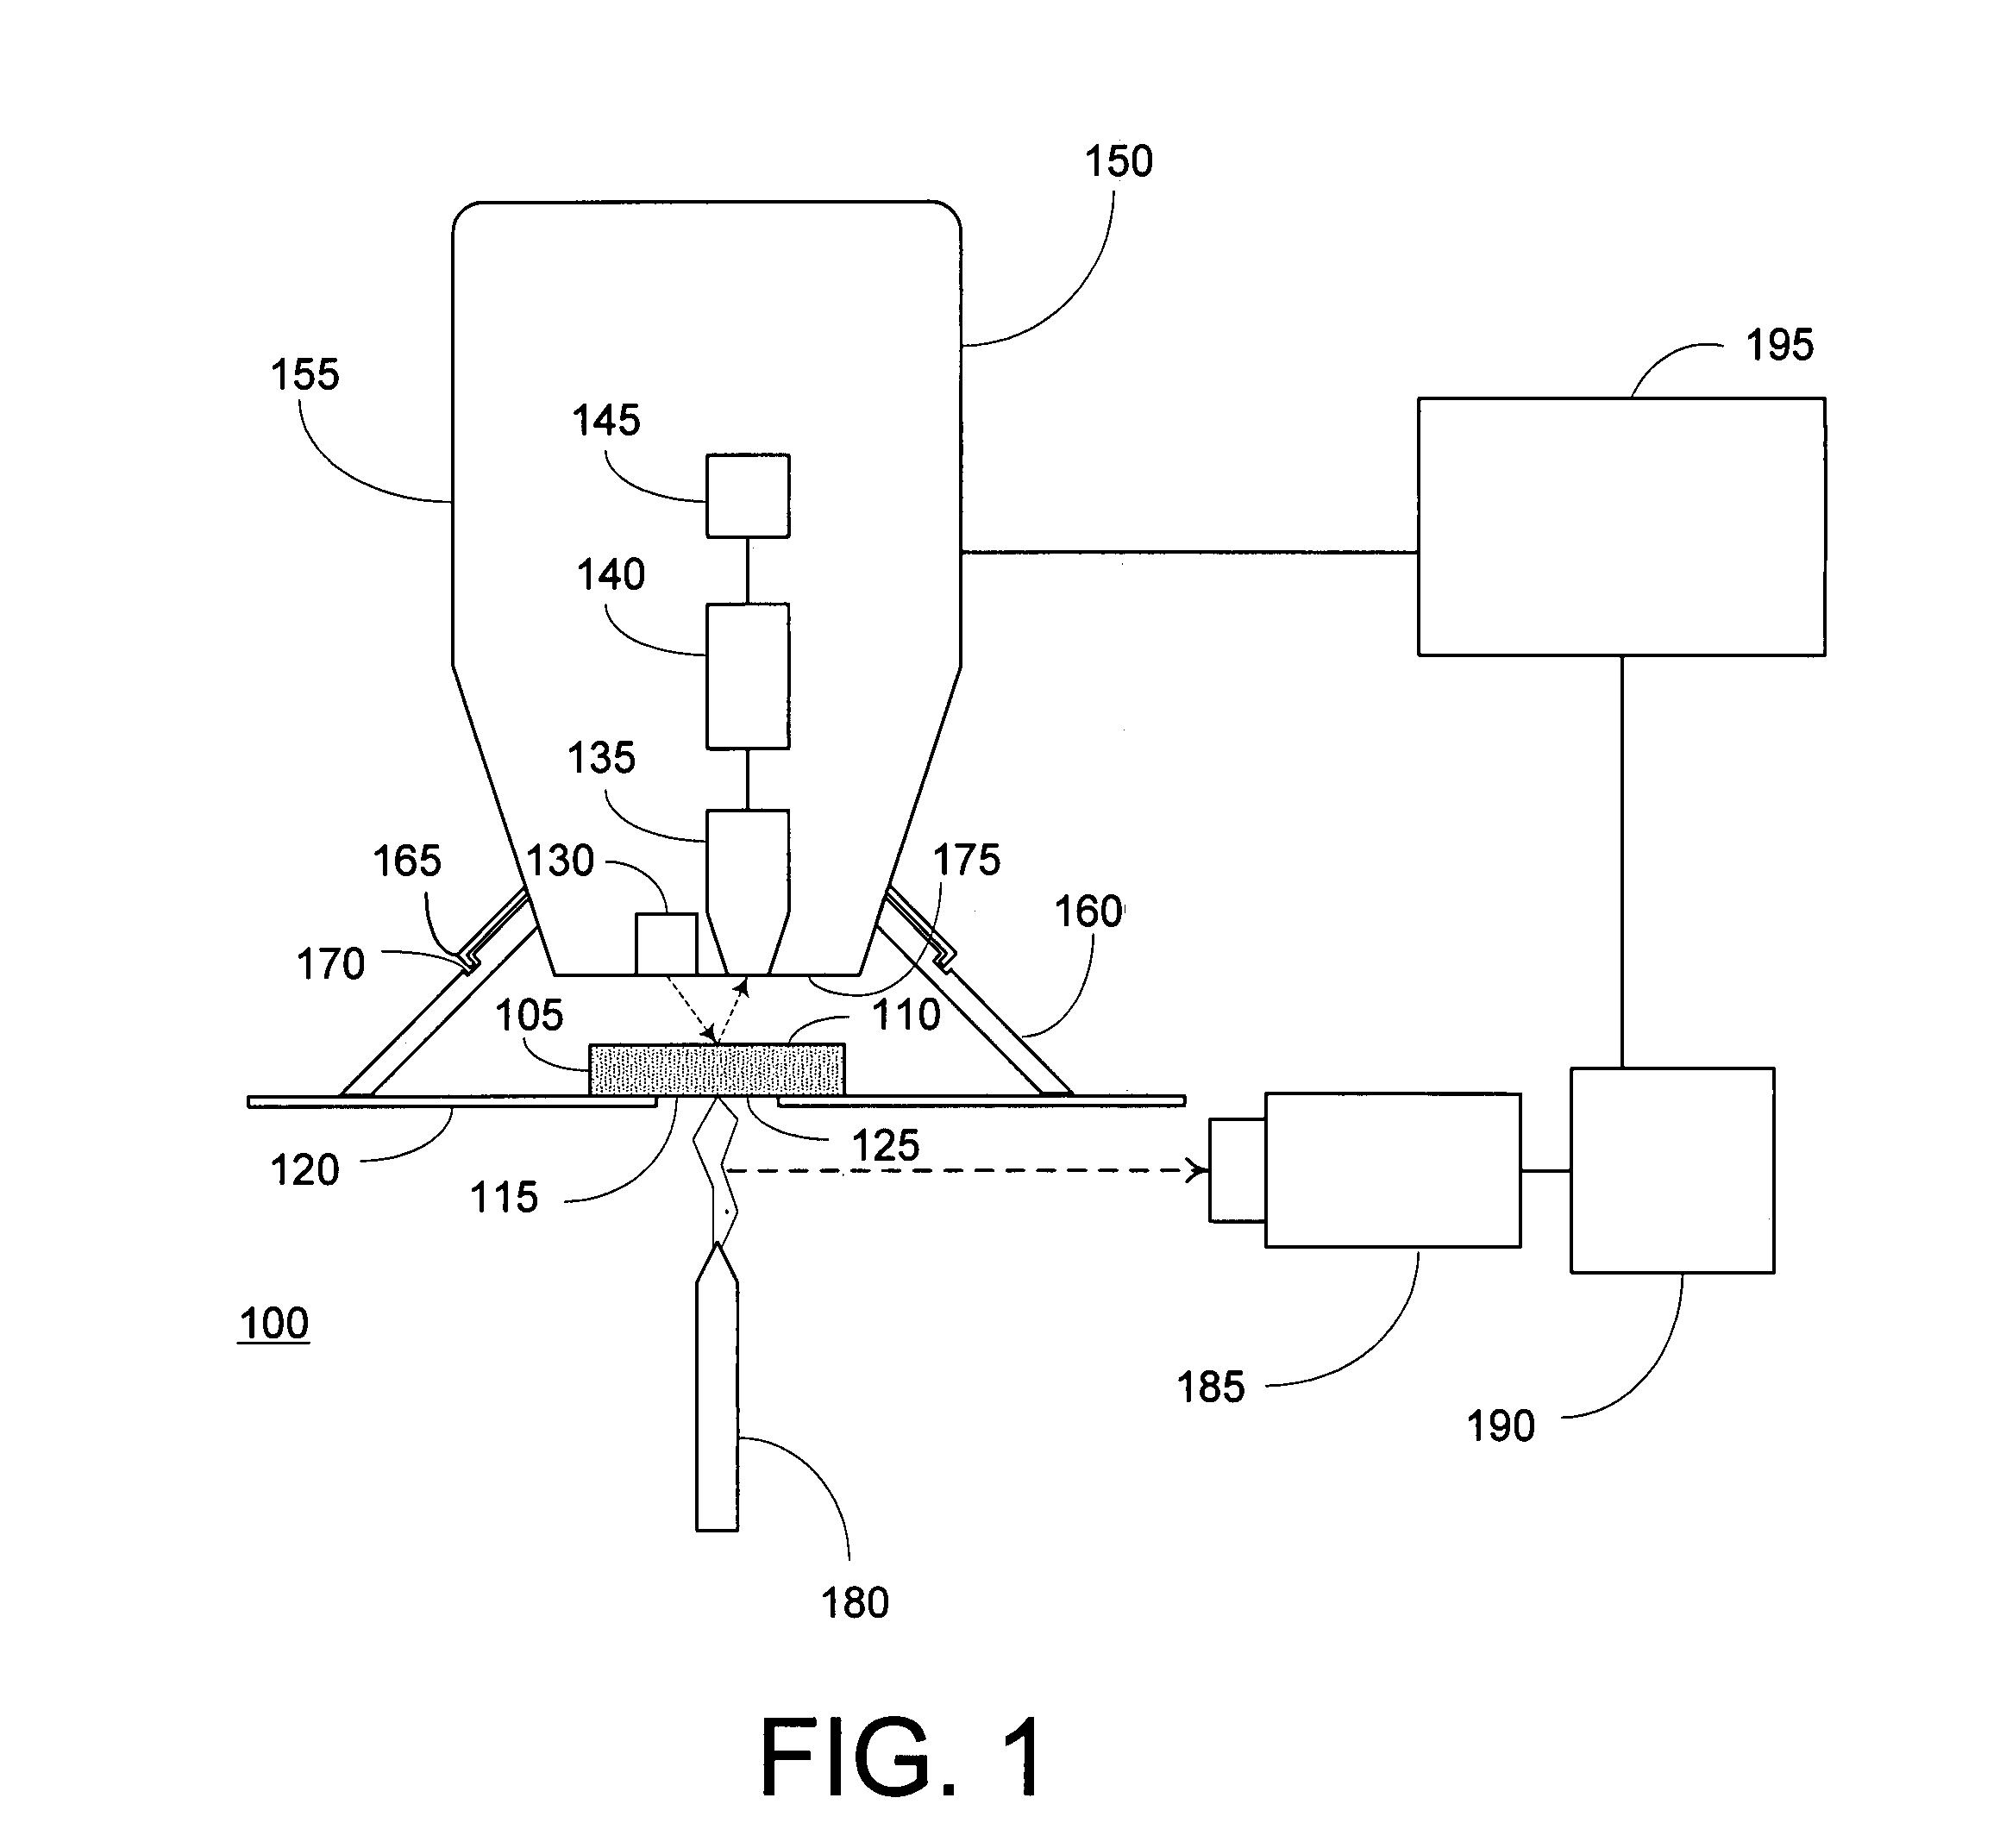 Instrument having X-ray fluorescence and spark emission spectroscopy analysis capabilities